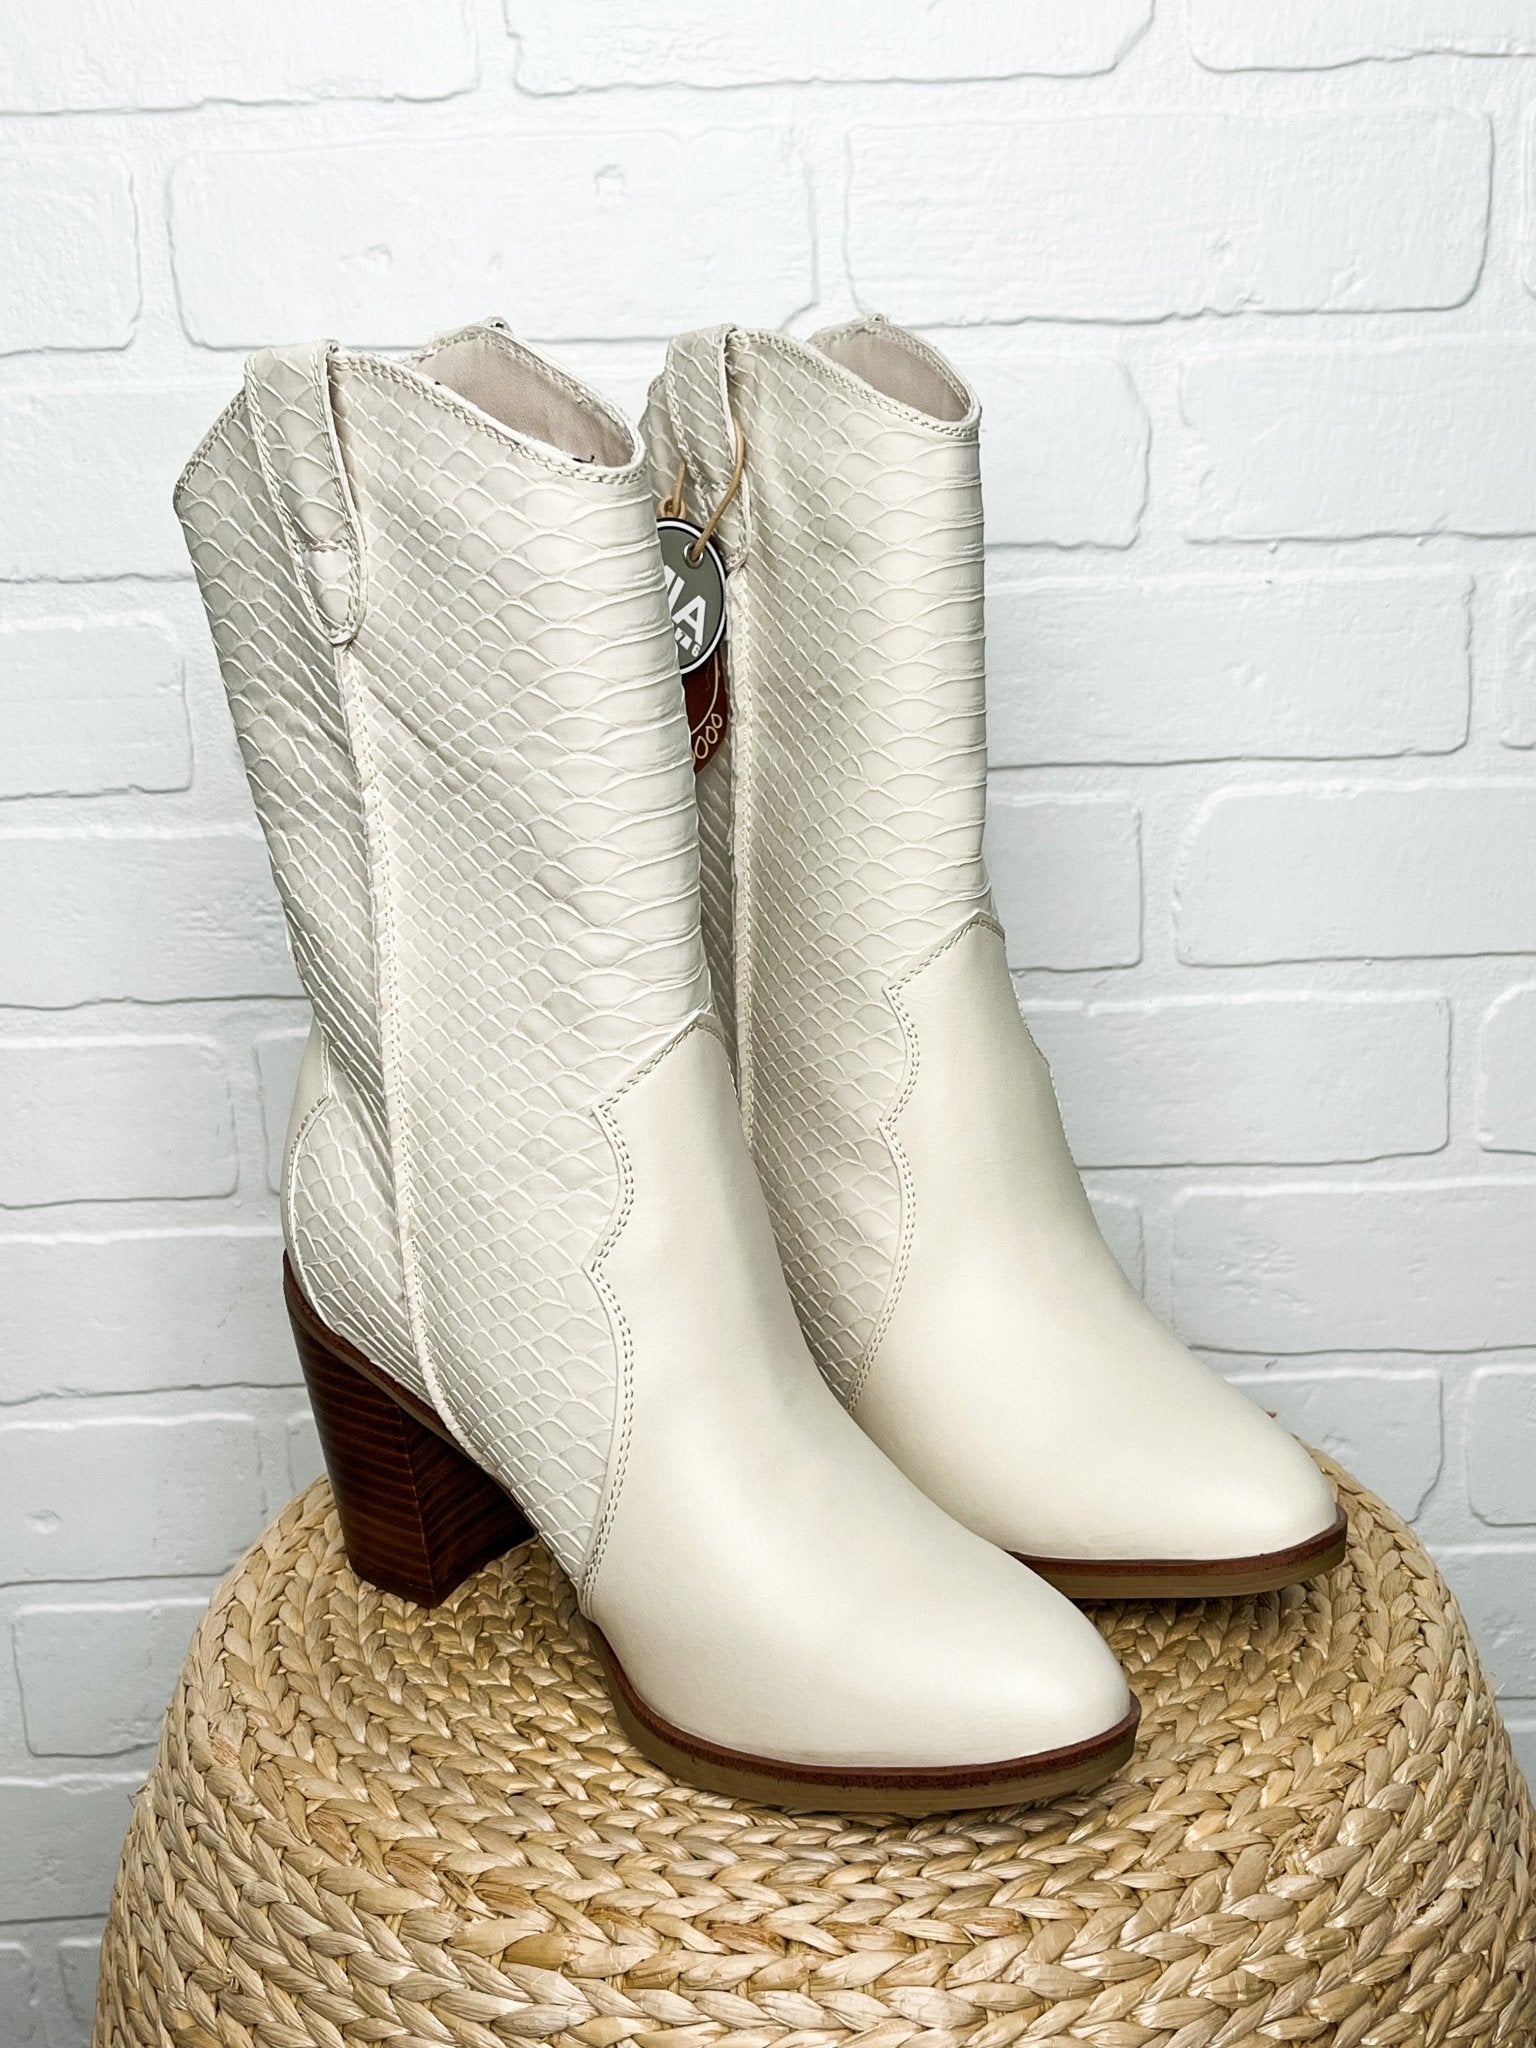 Raylyn cowboy boots ivory python - Trendy boots - Fashion Shoes at Lush Fashion Lounge Boutique in Oklahoma City